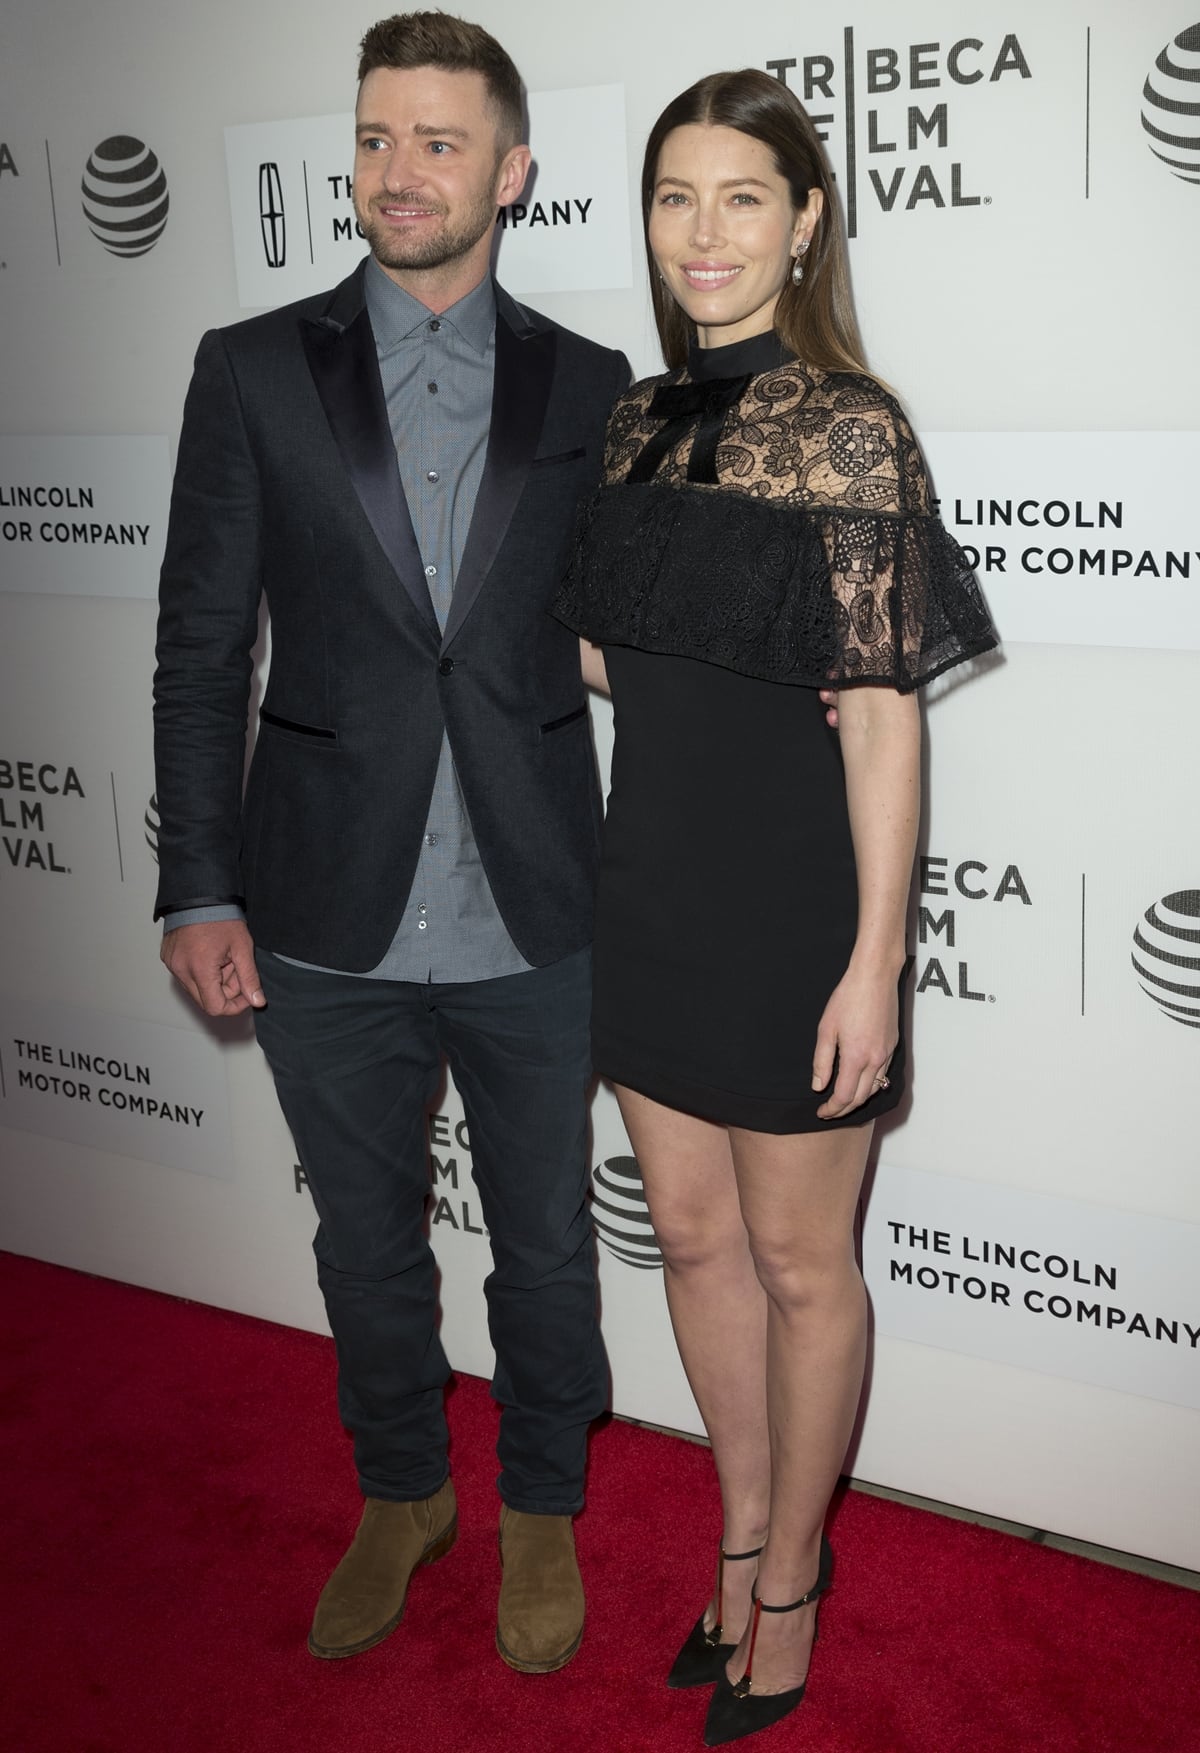 Jessica Biel in a Self Portrait Pre-Fall 2016 mini lace dress with her husband Justin Timberlake at the 2016 Tribeca Film Festival after-party for "The Devil And The Deep Blue Sea"